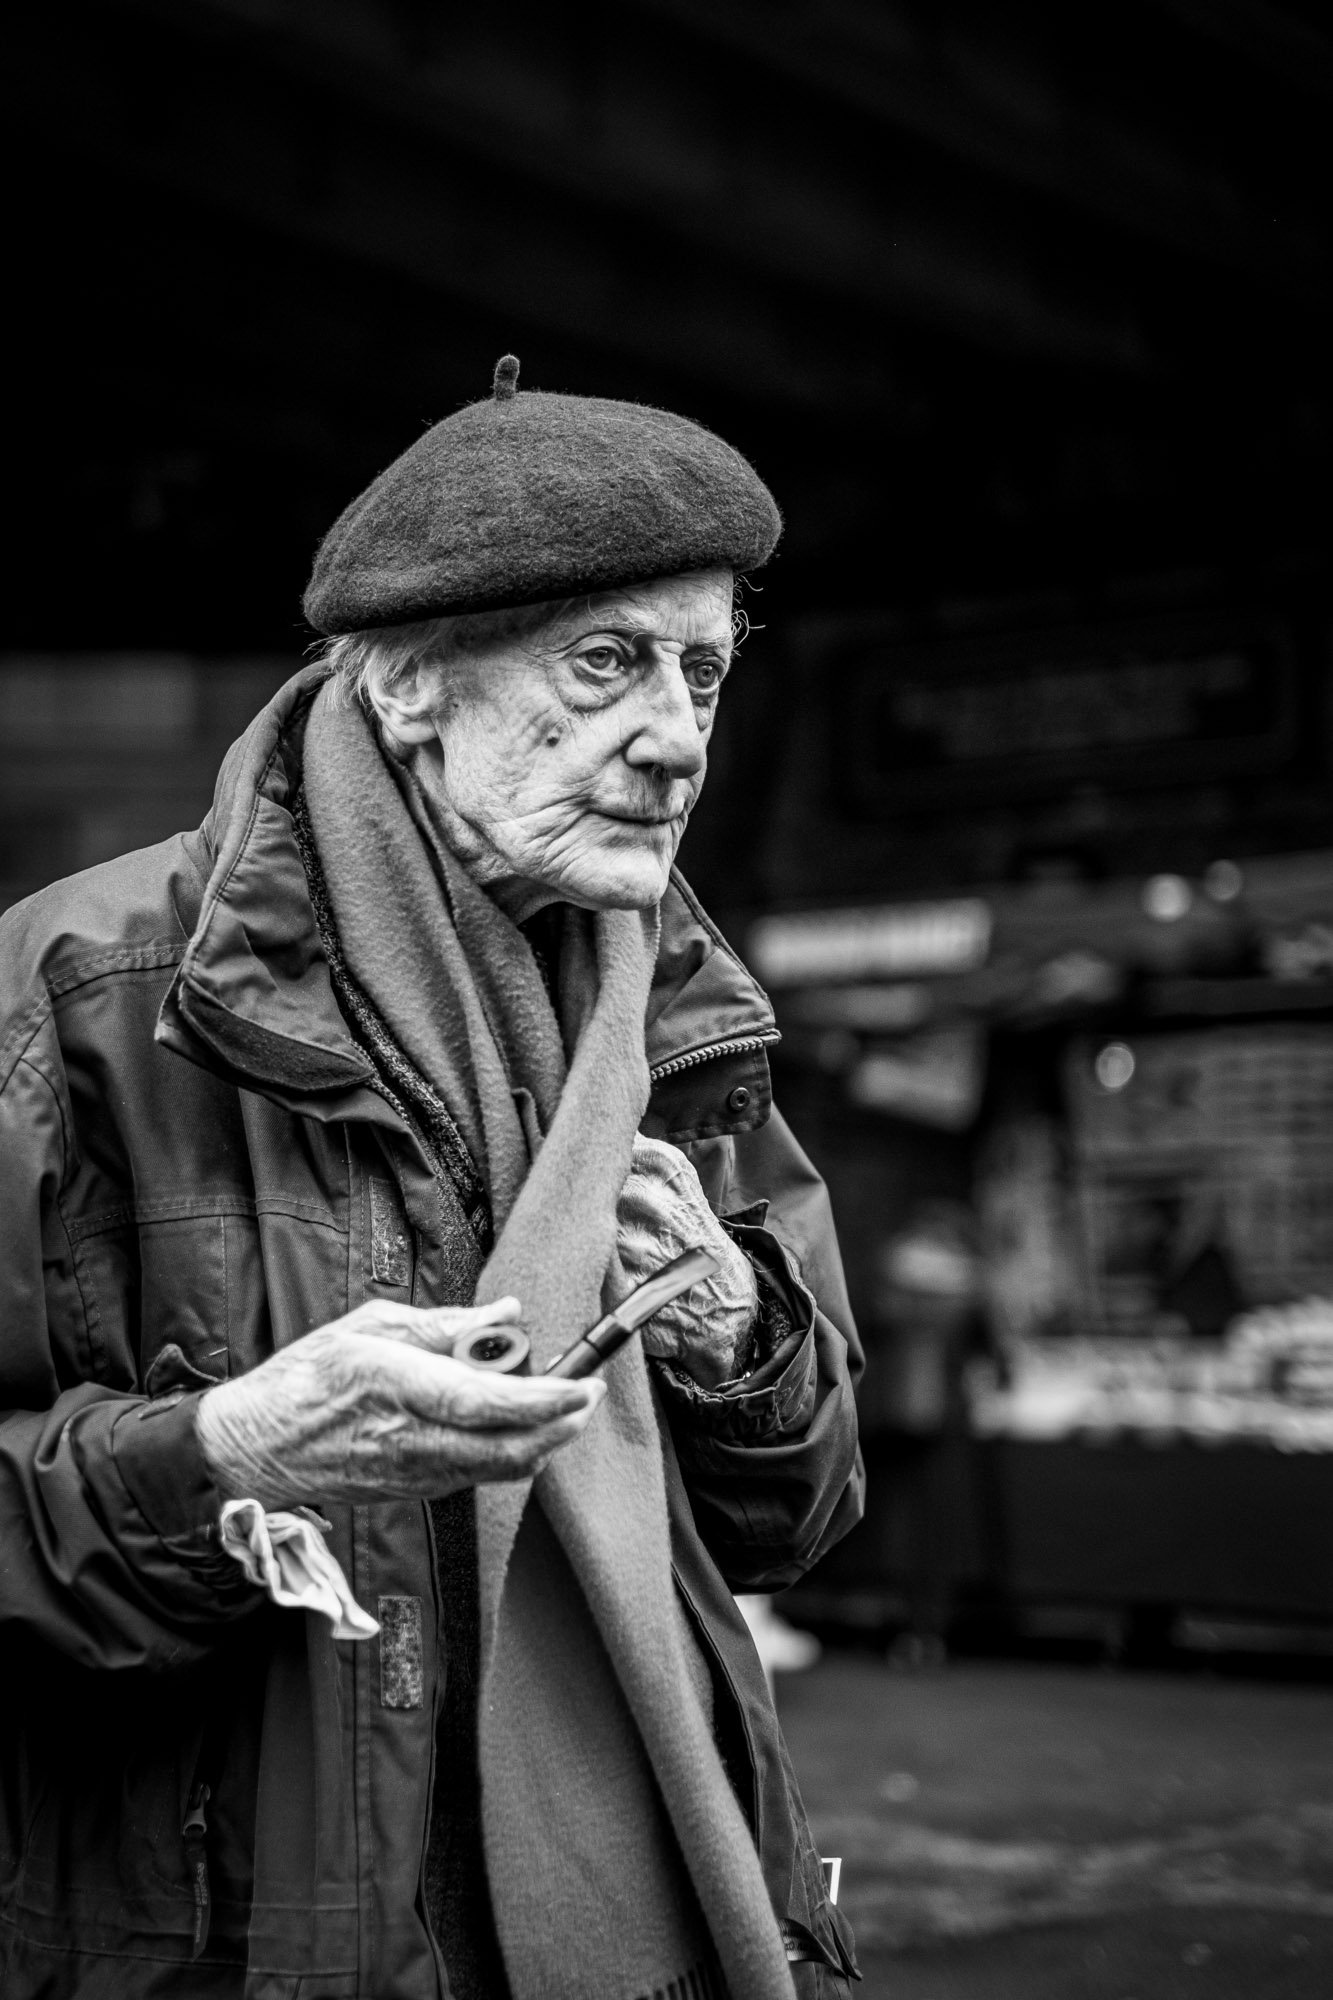 Street Photography - Black and White - Fujifilm - Andy Kirby - MrKirby Photography-06.jpg